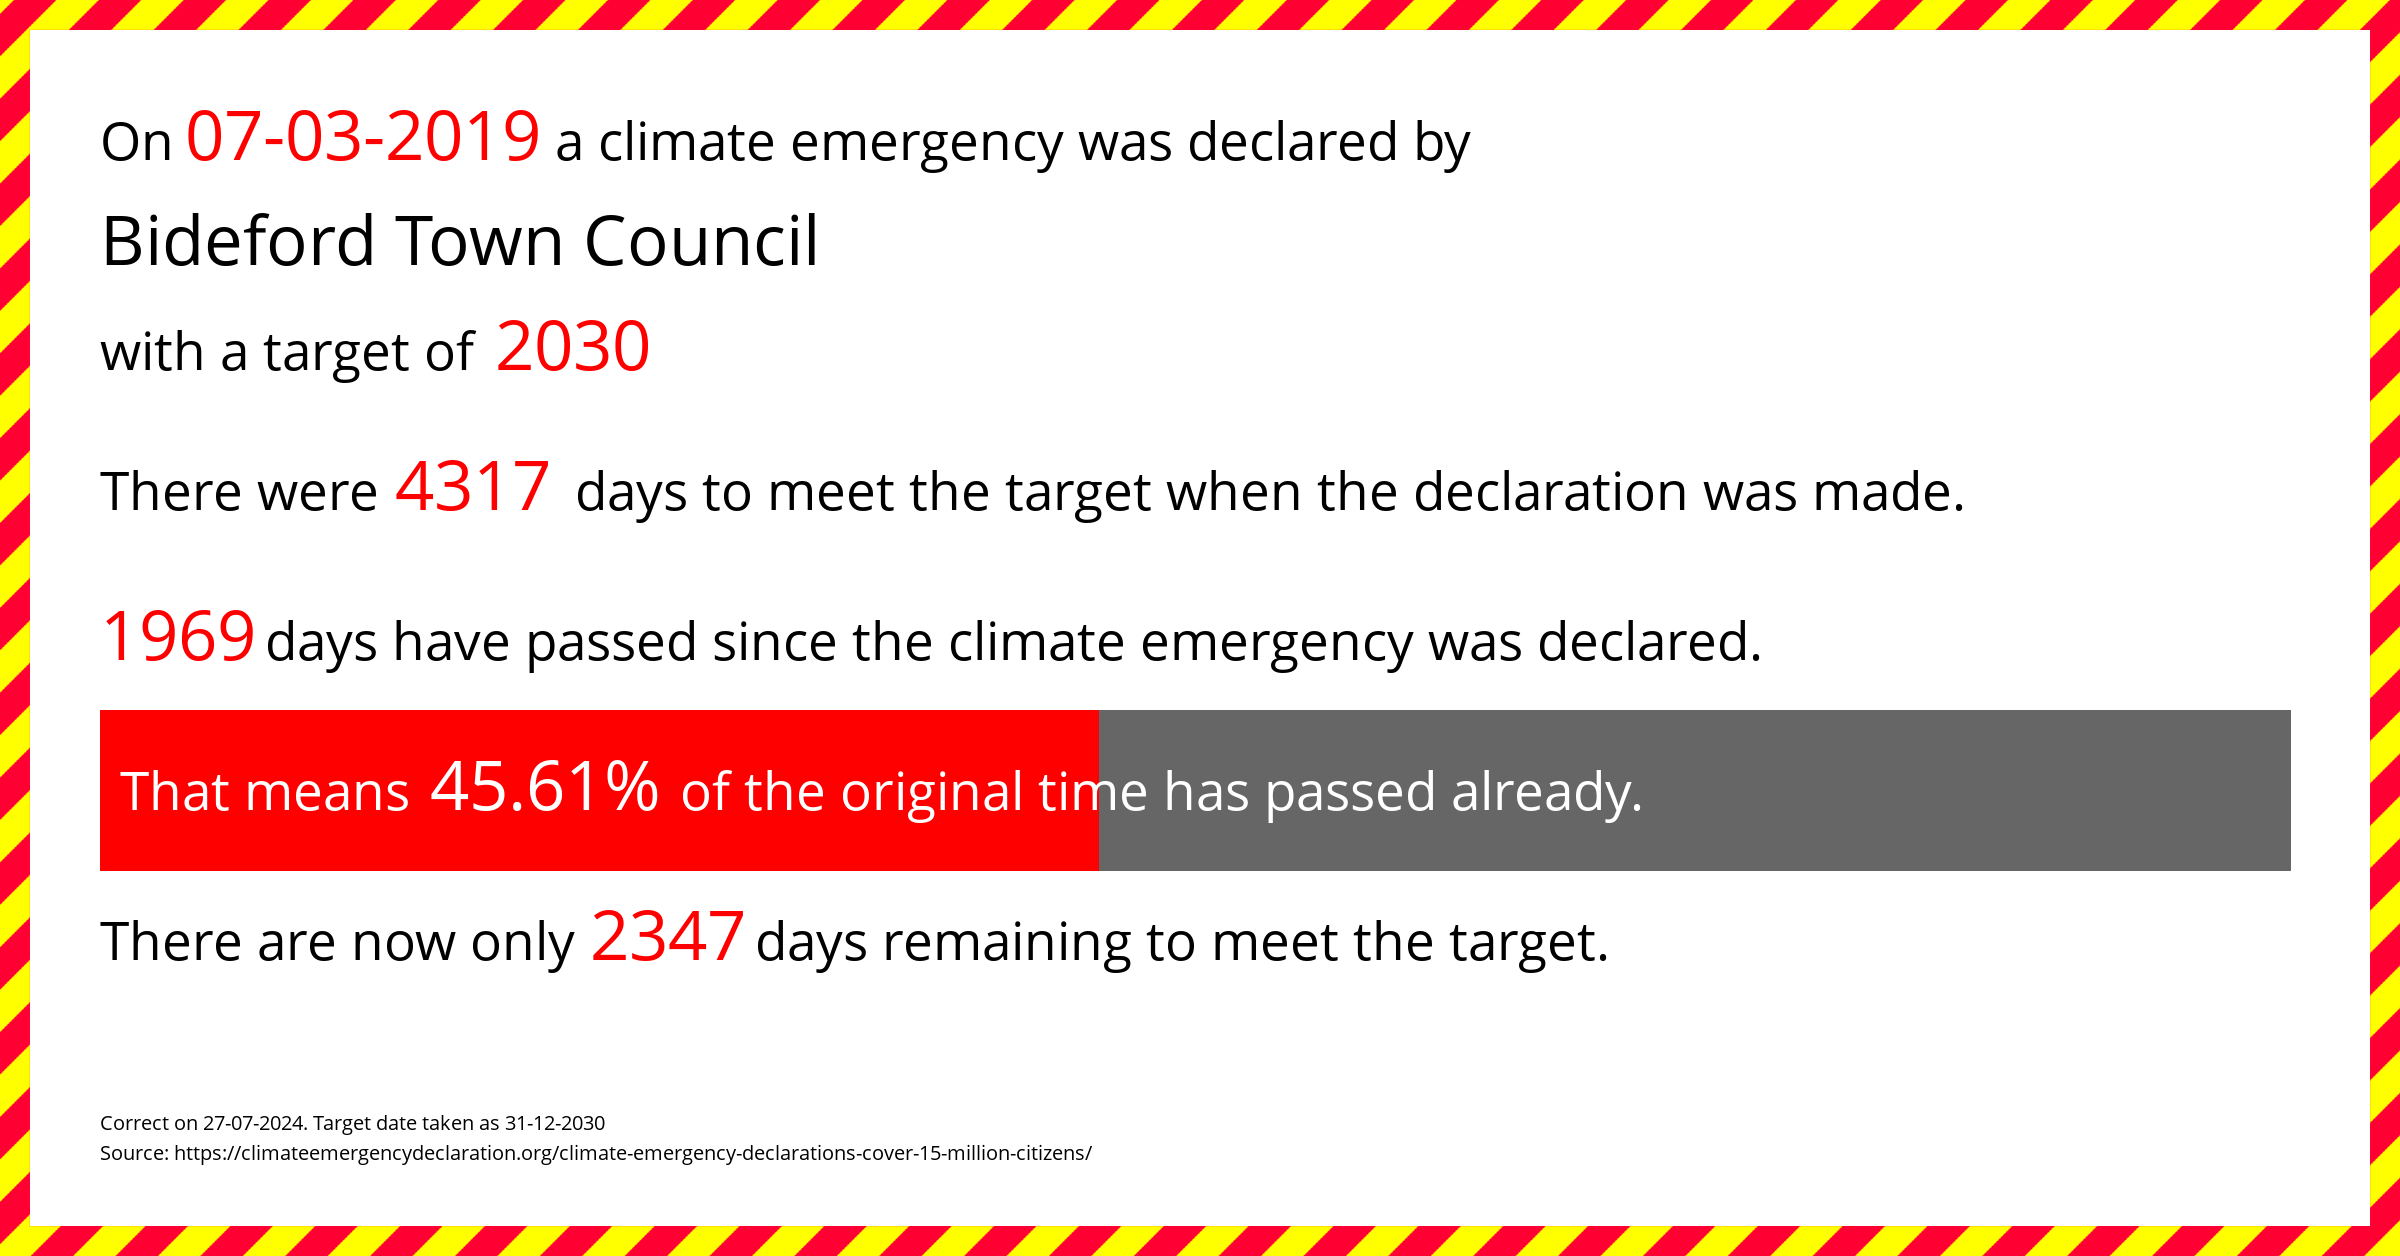 Bideford Town Council declared a Climate emergency on Thursday 7th March 2019, with a target of 2030.